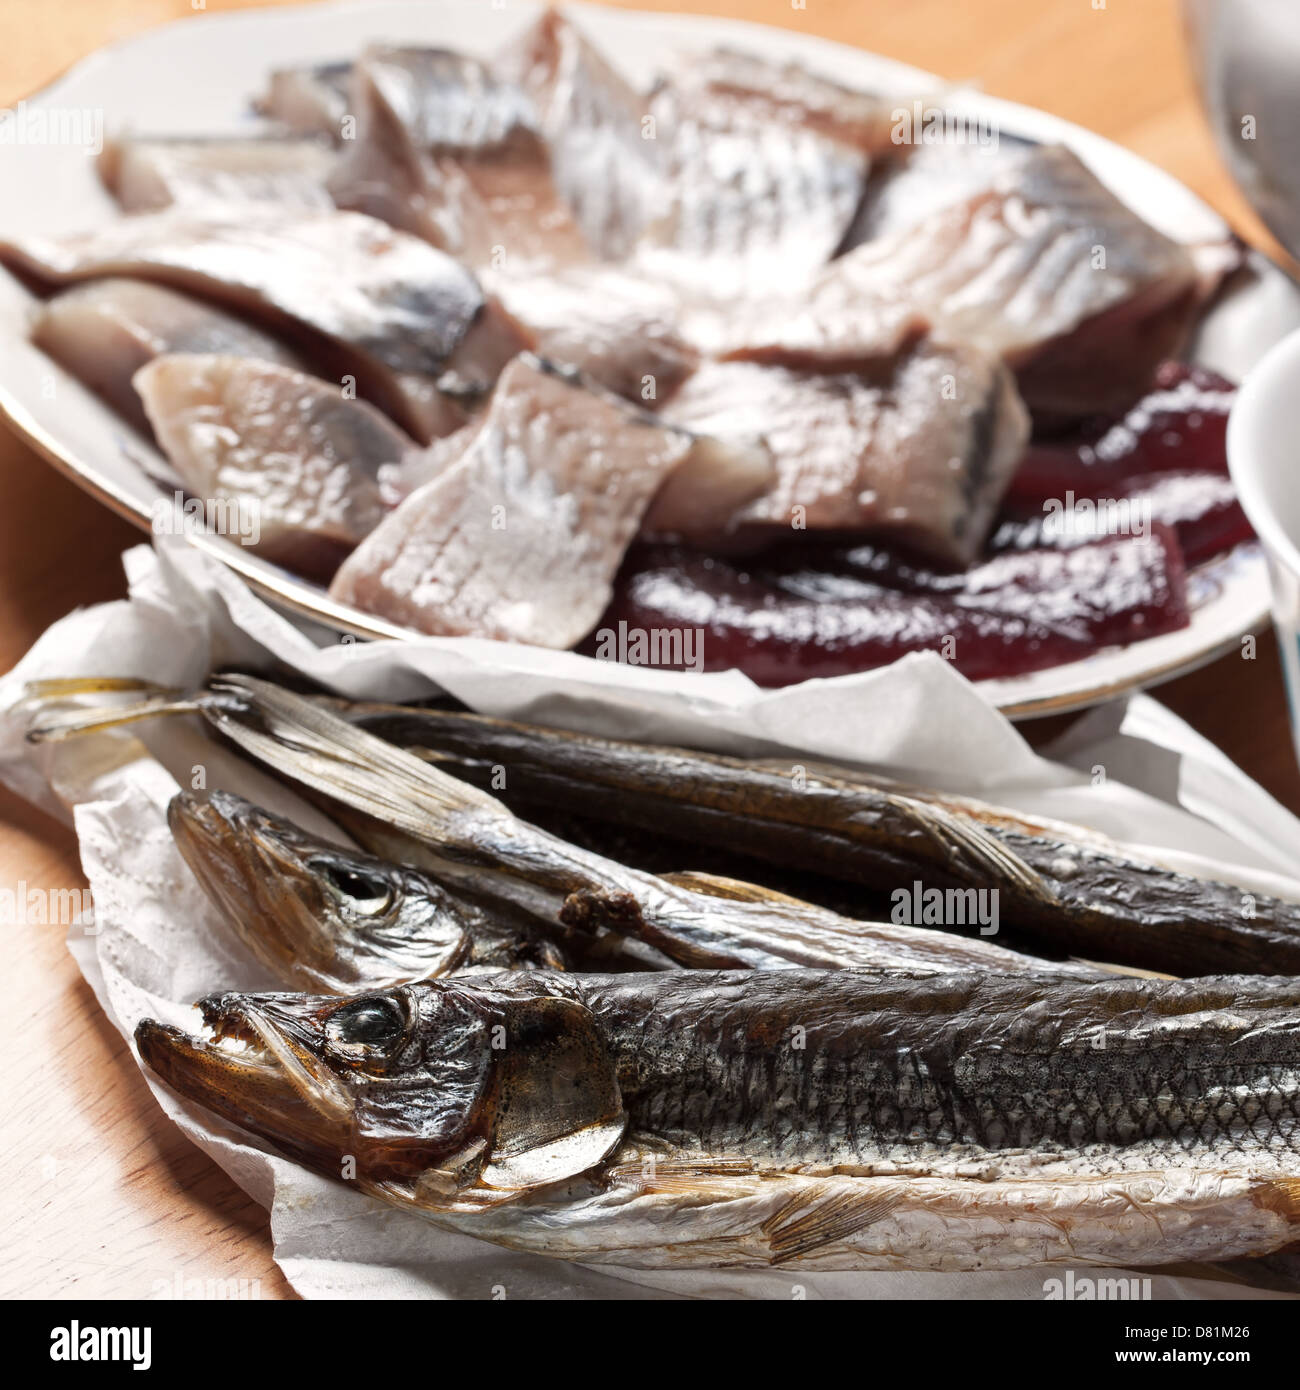 Seafood theme. Macro photo of assorted fish on wooden table Stock Photo